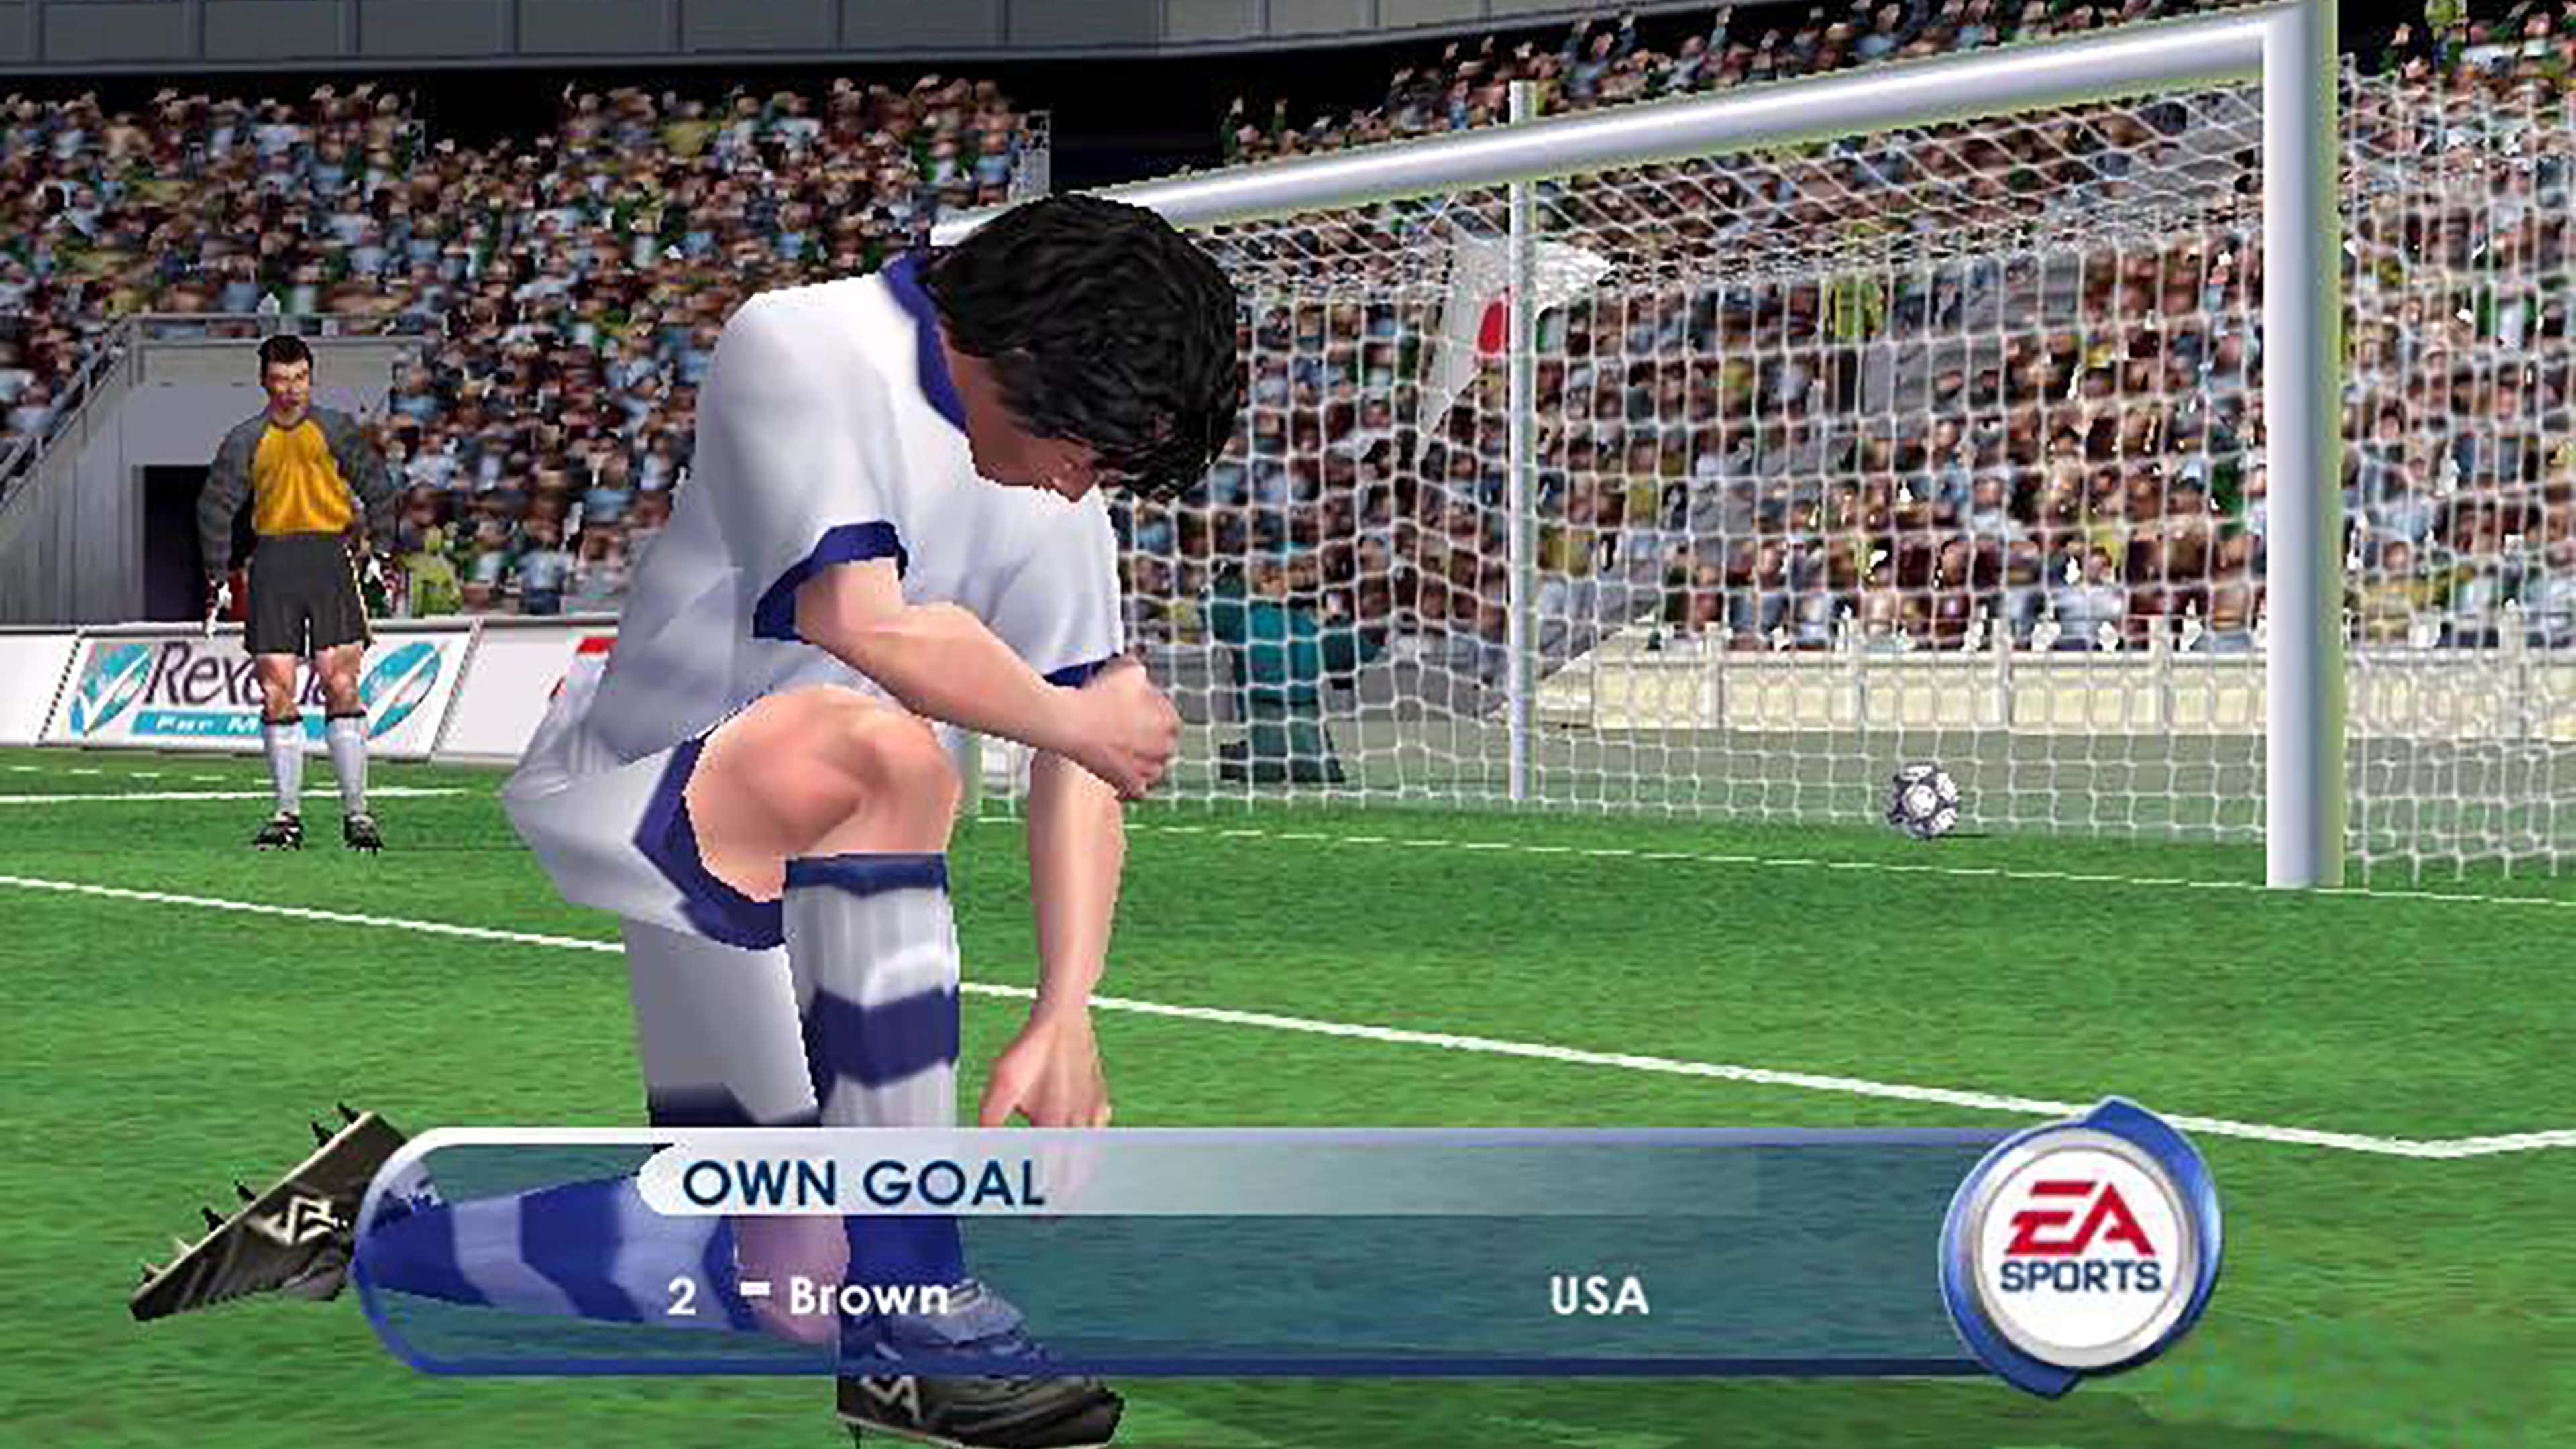 EA Sports FIFA Videogame: The Early Days